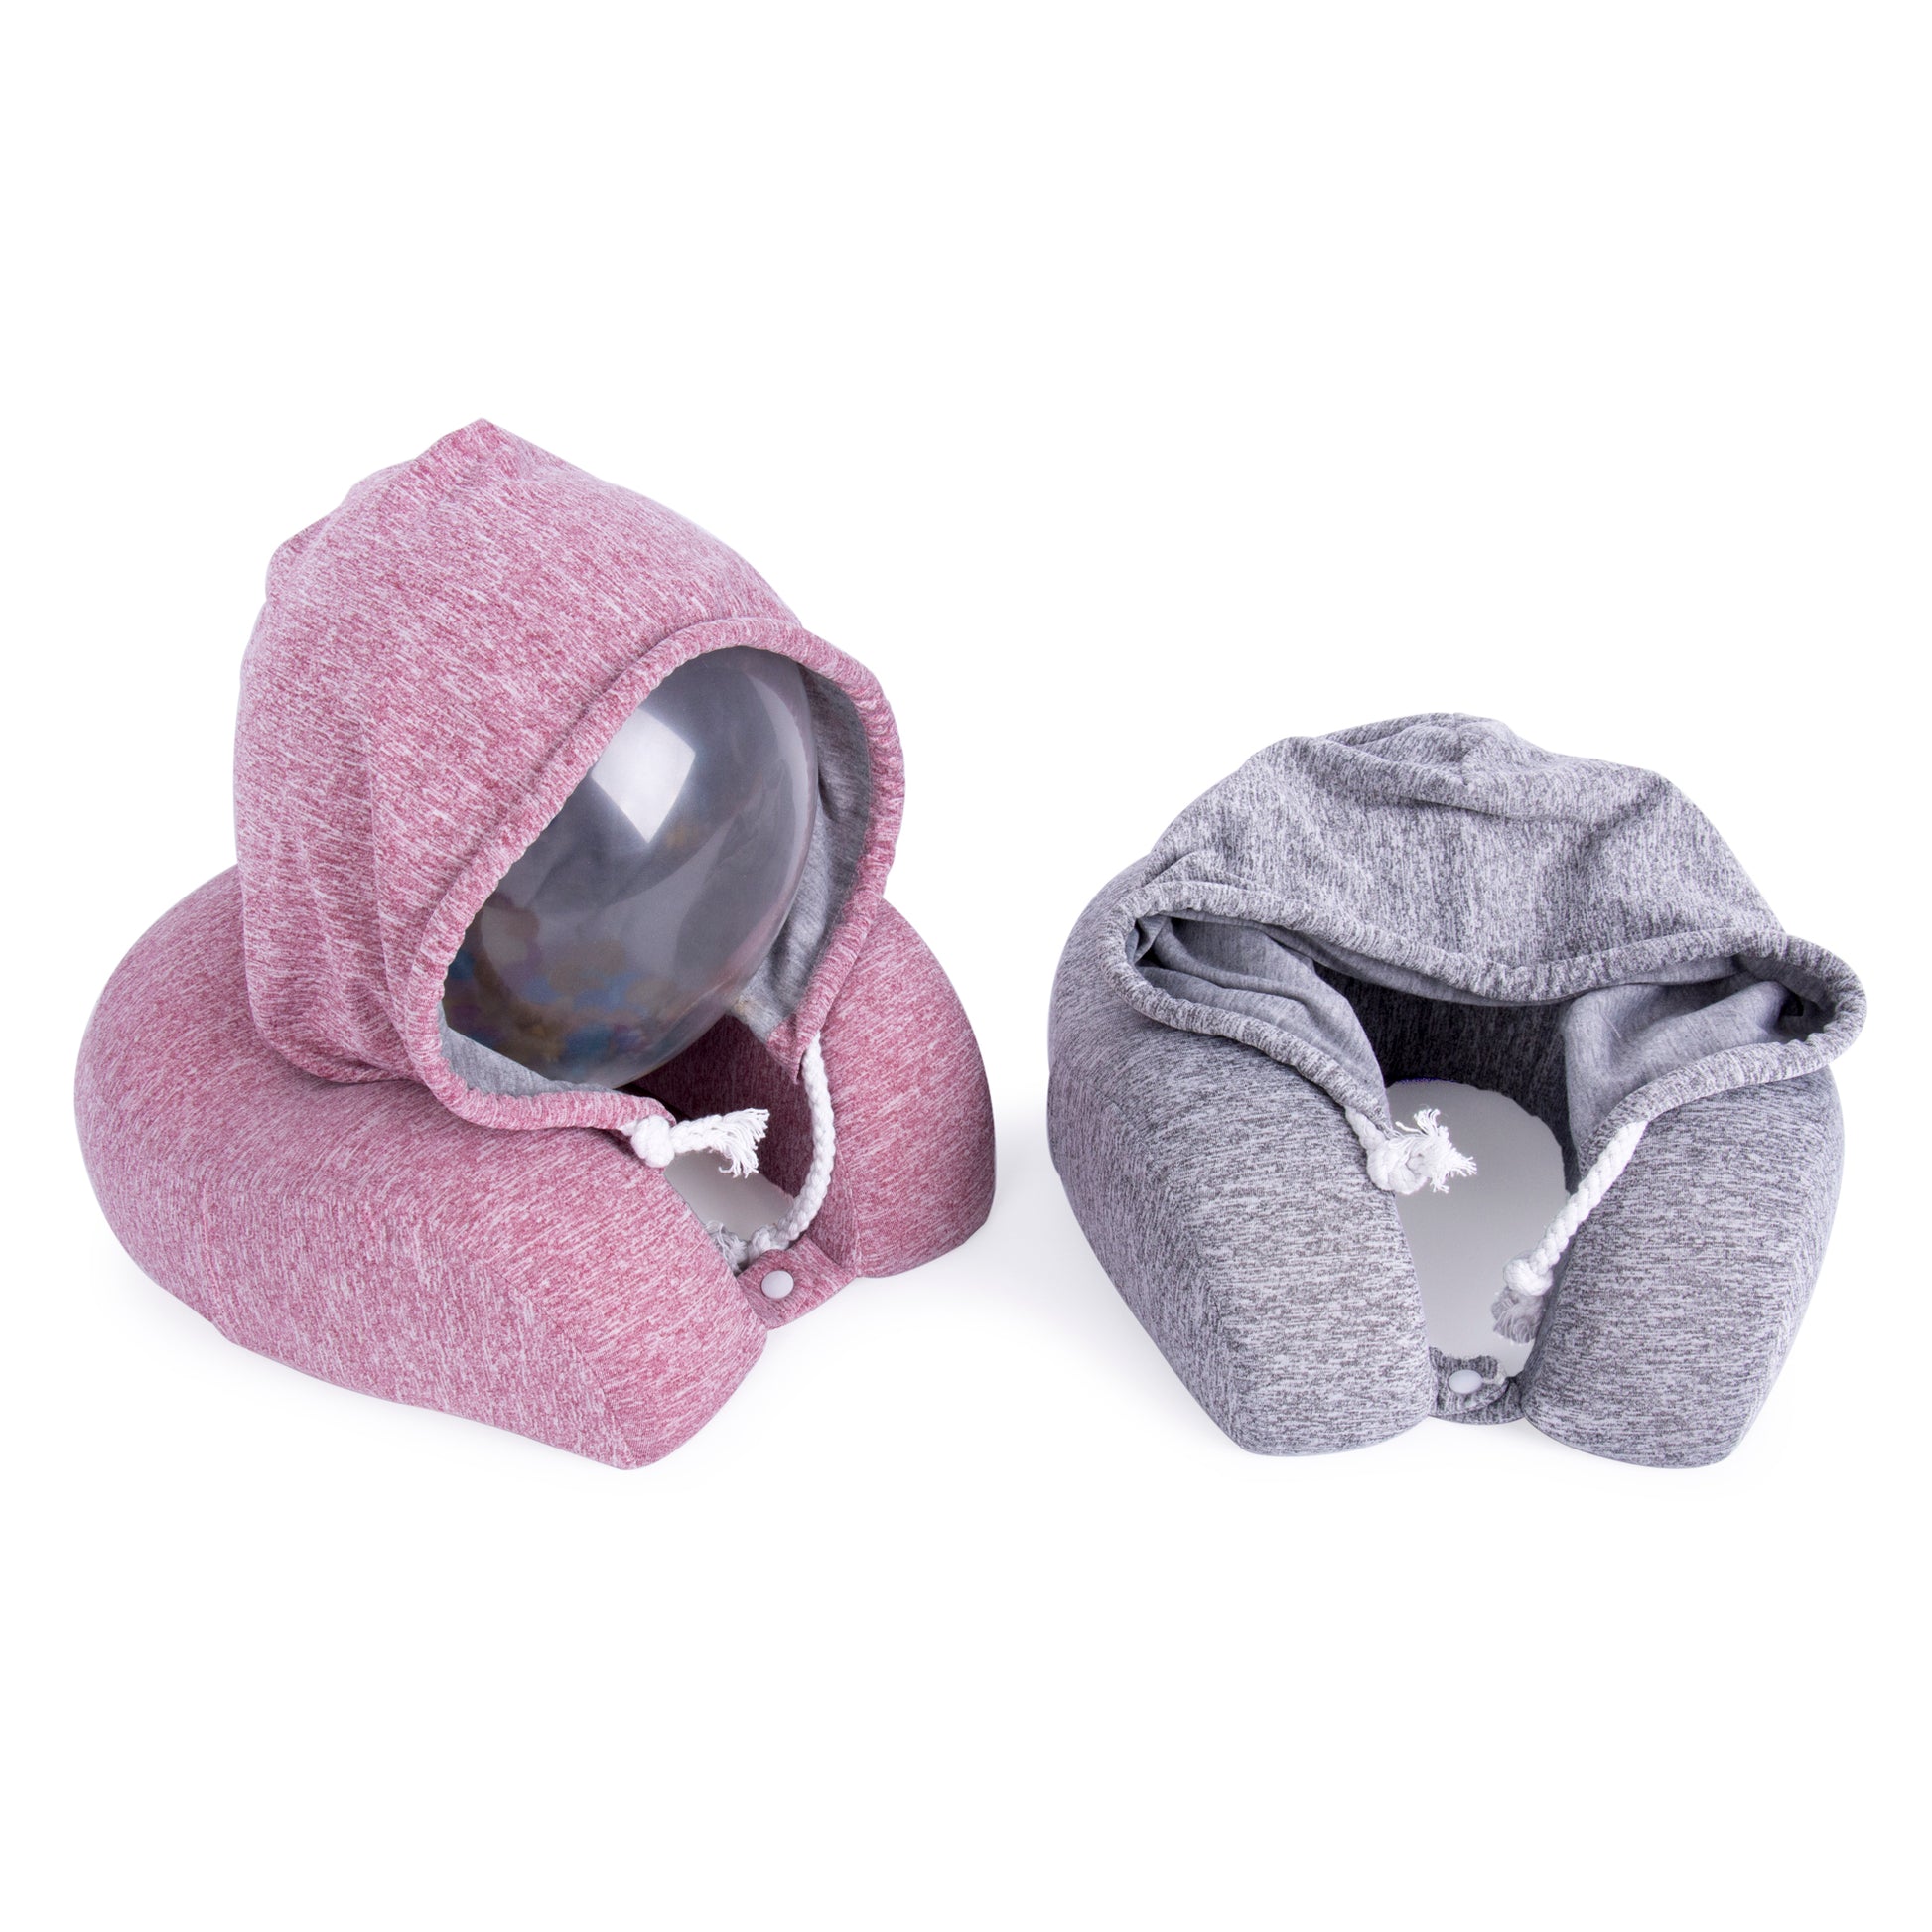 Memory Foam Neck Pillow with Hoody